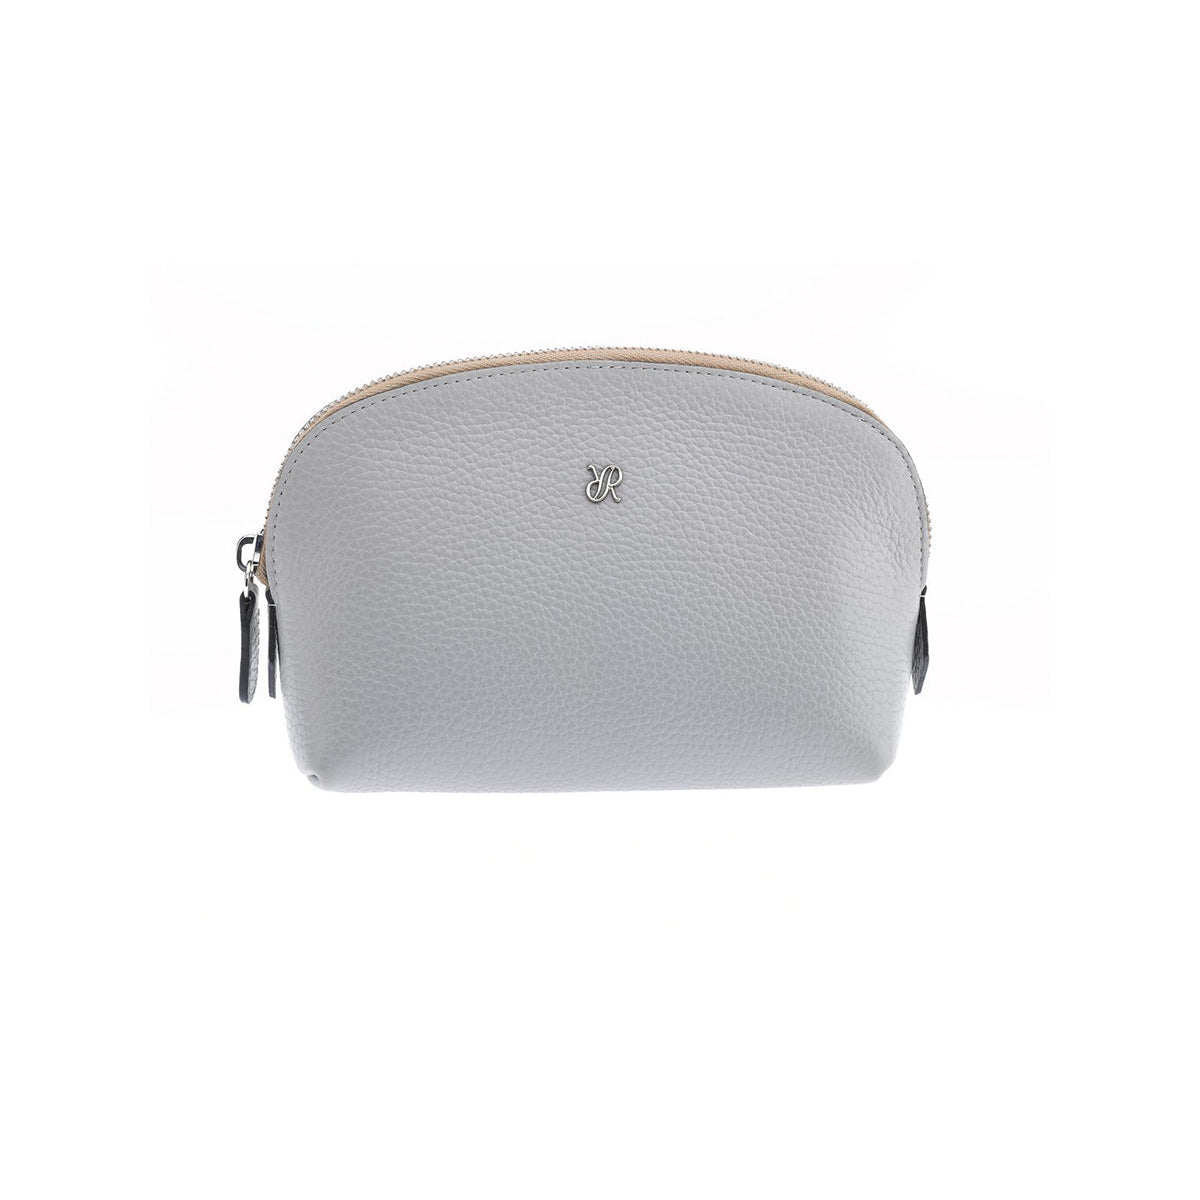 Rapport-Ladies-Small Makeup Pouch-Grey